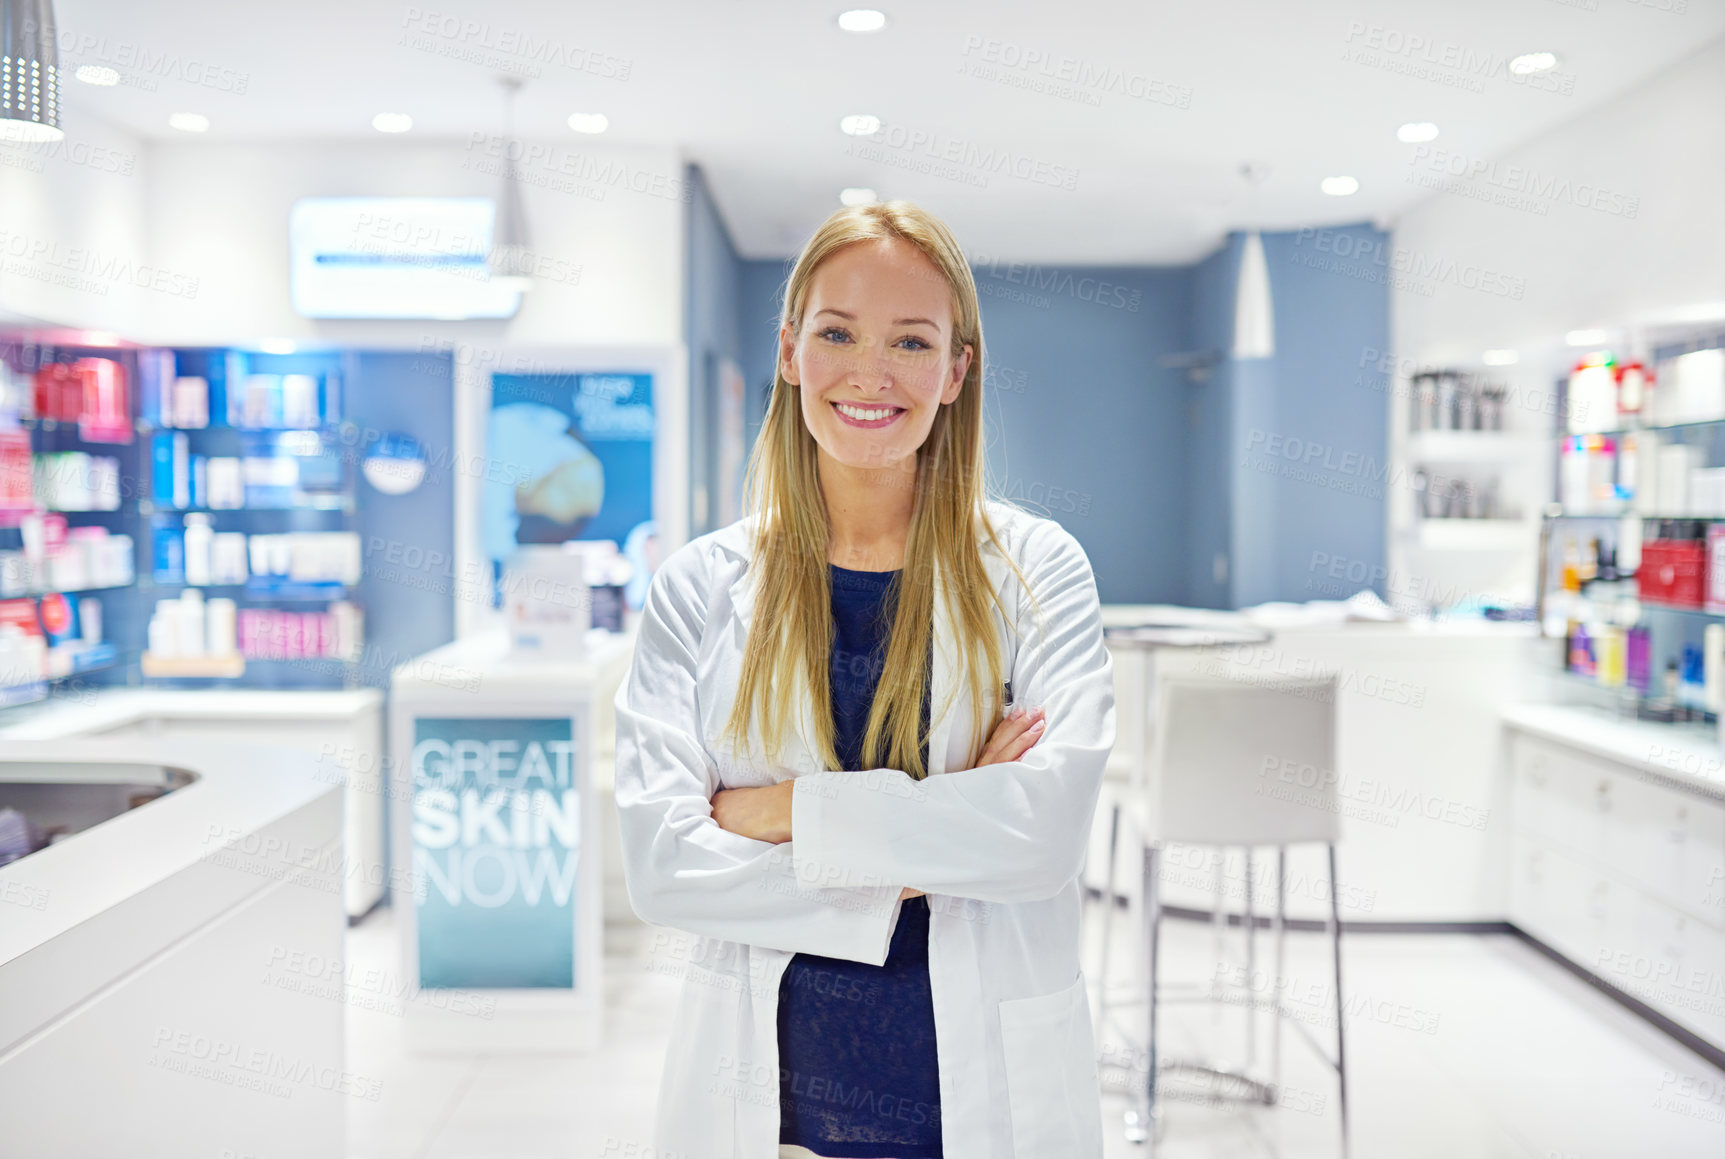 Buy stock photo Portrait of an attractive young woman standing in a cosmetics store